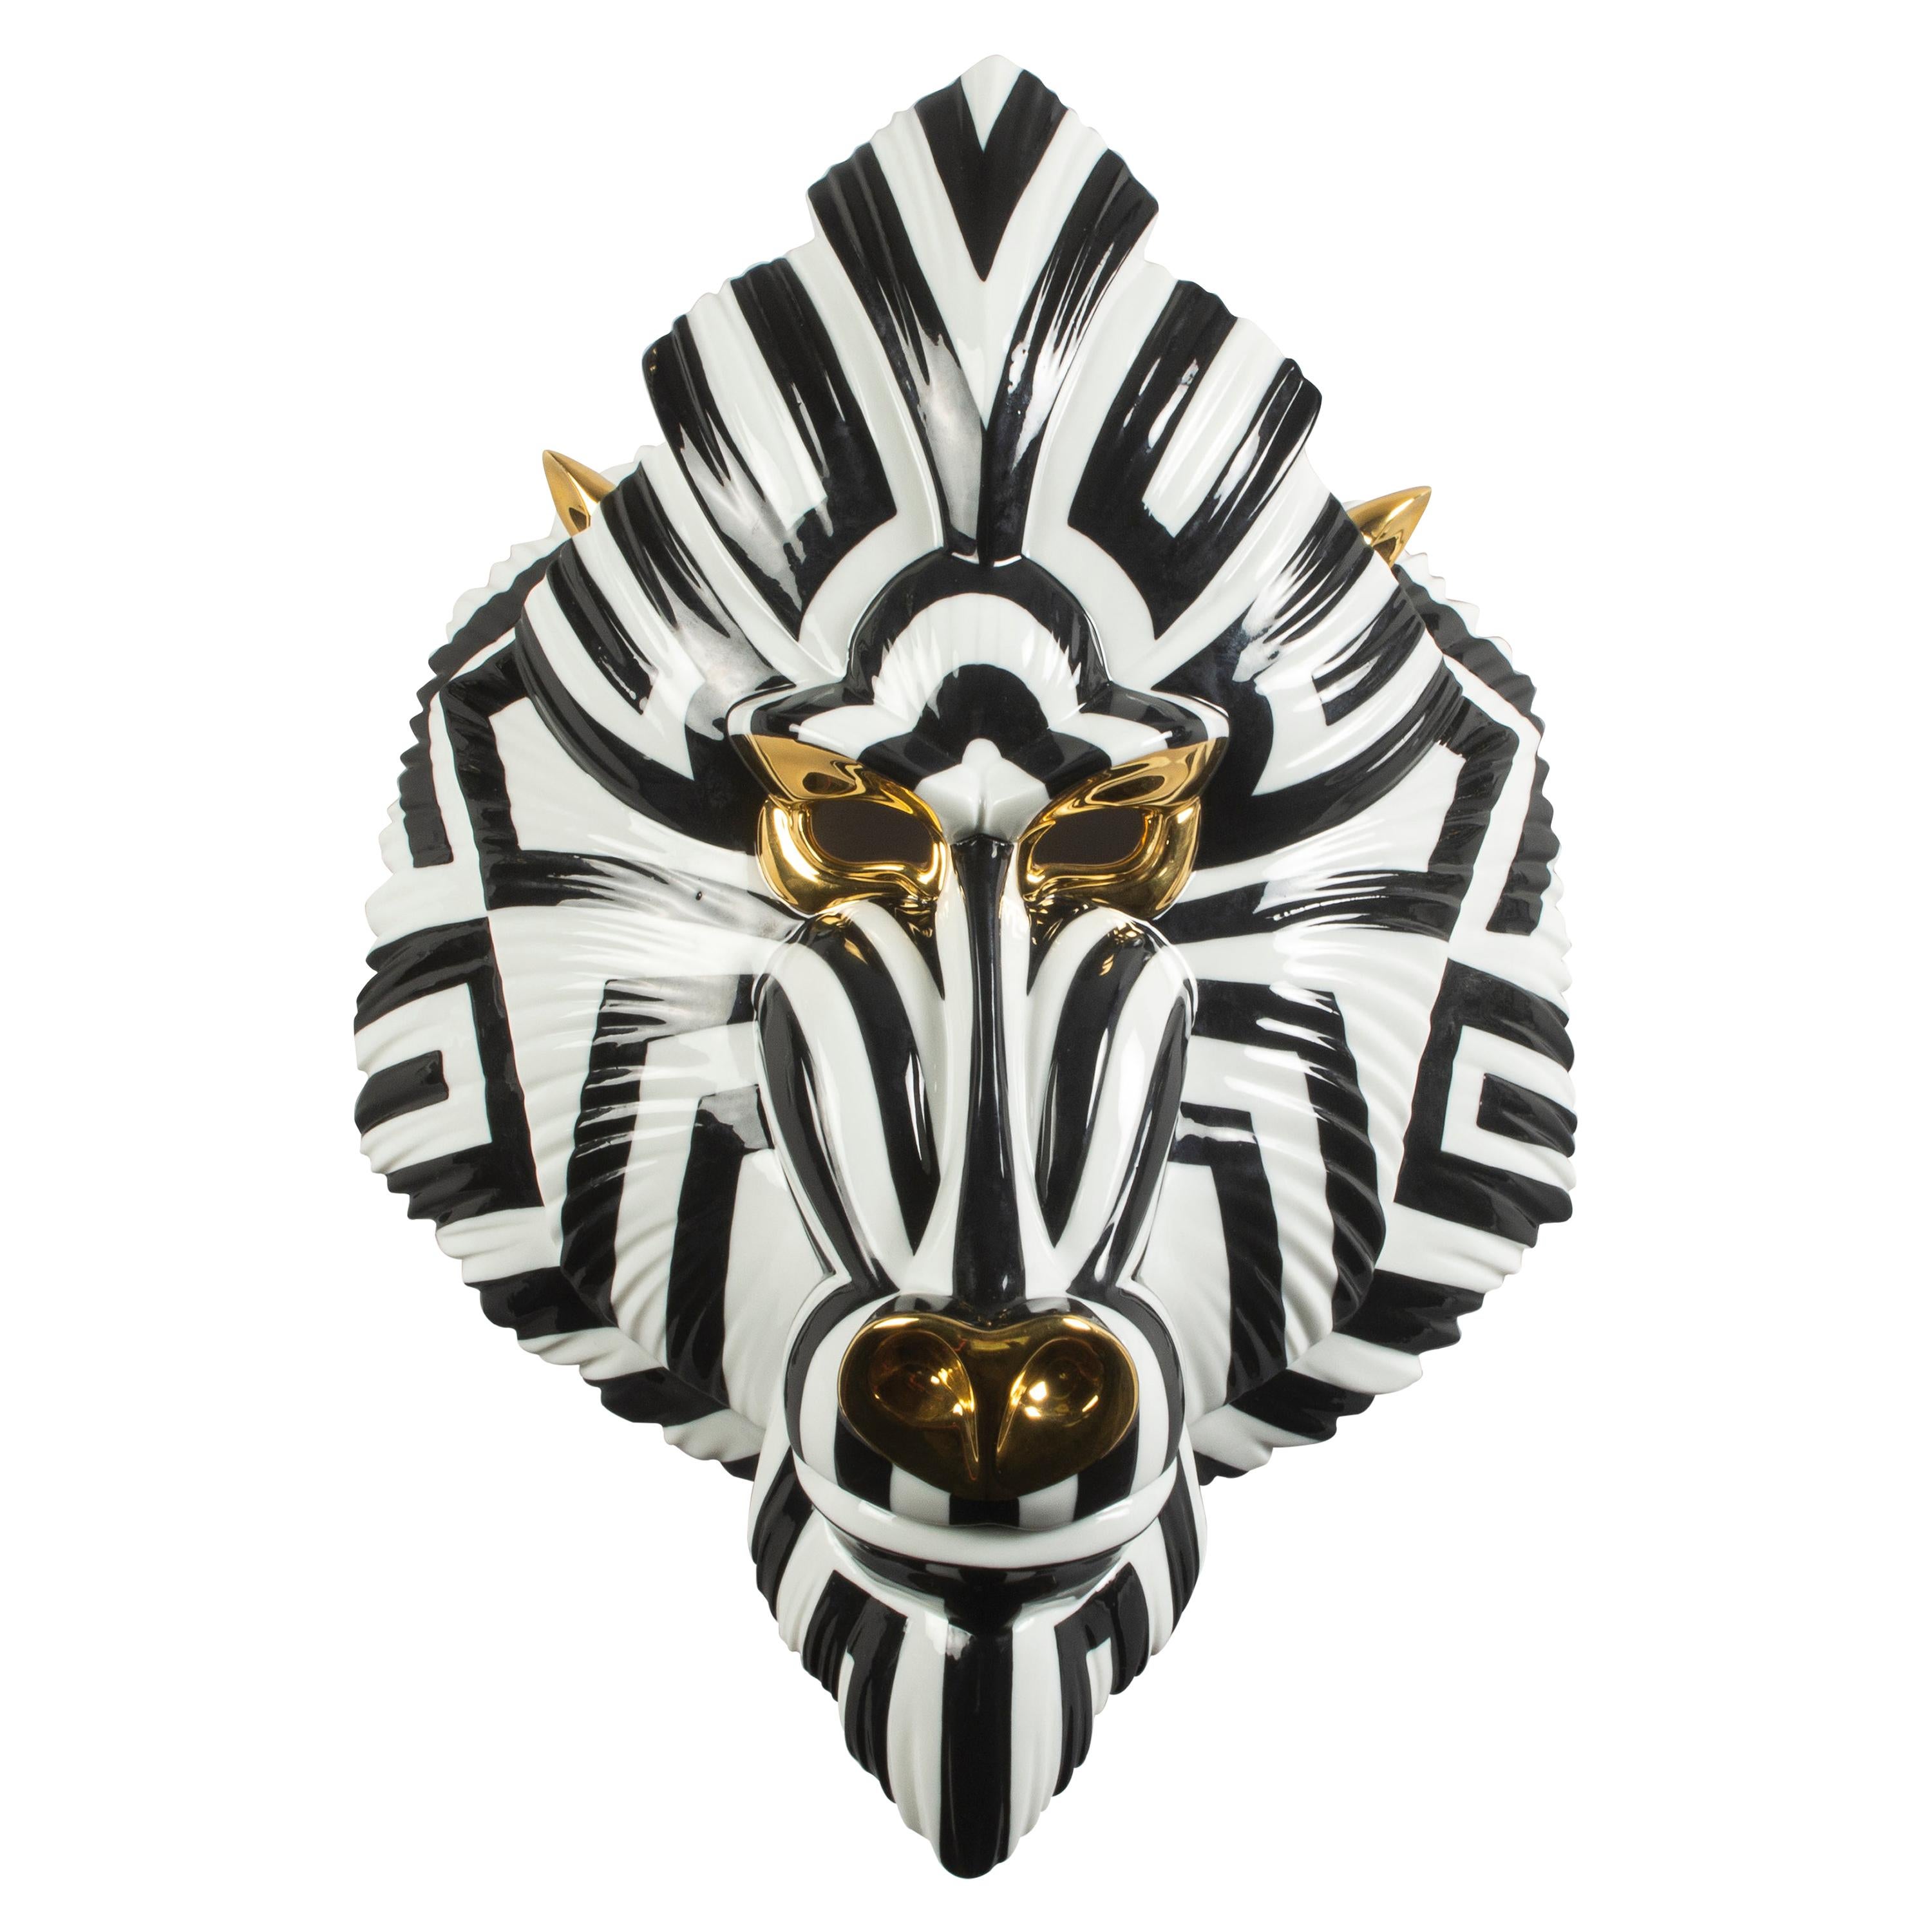 Lladró Mandrill Mask in Black and Gold by José Luis Santes